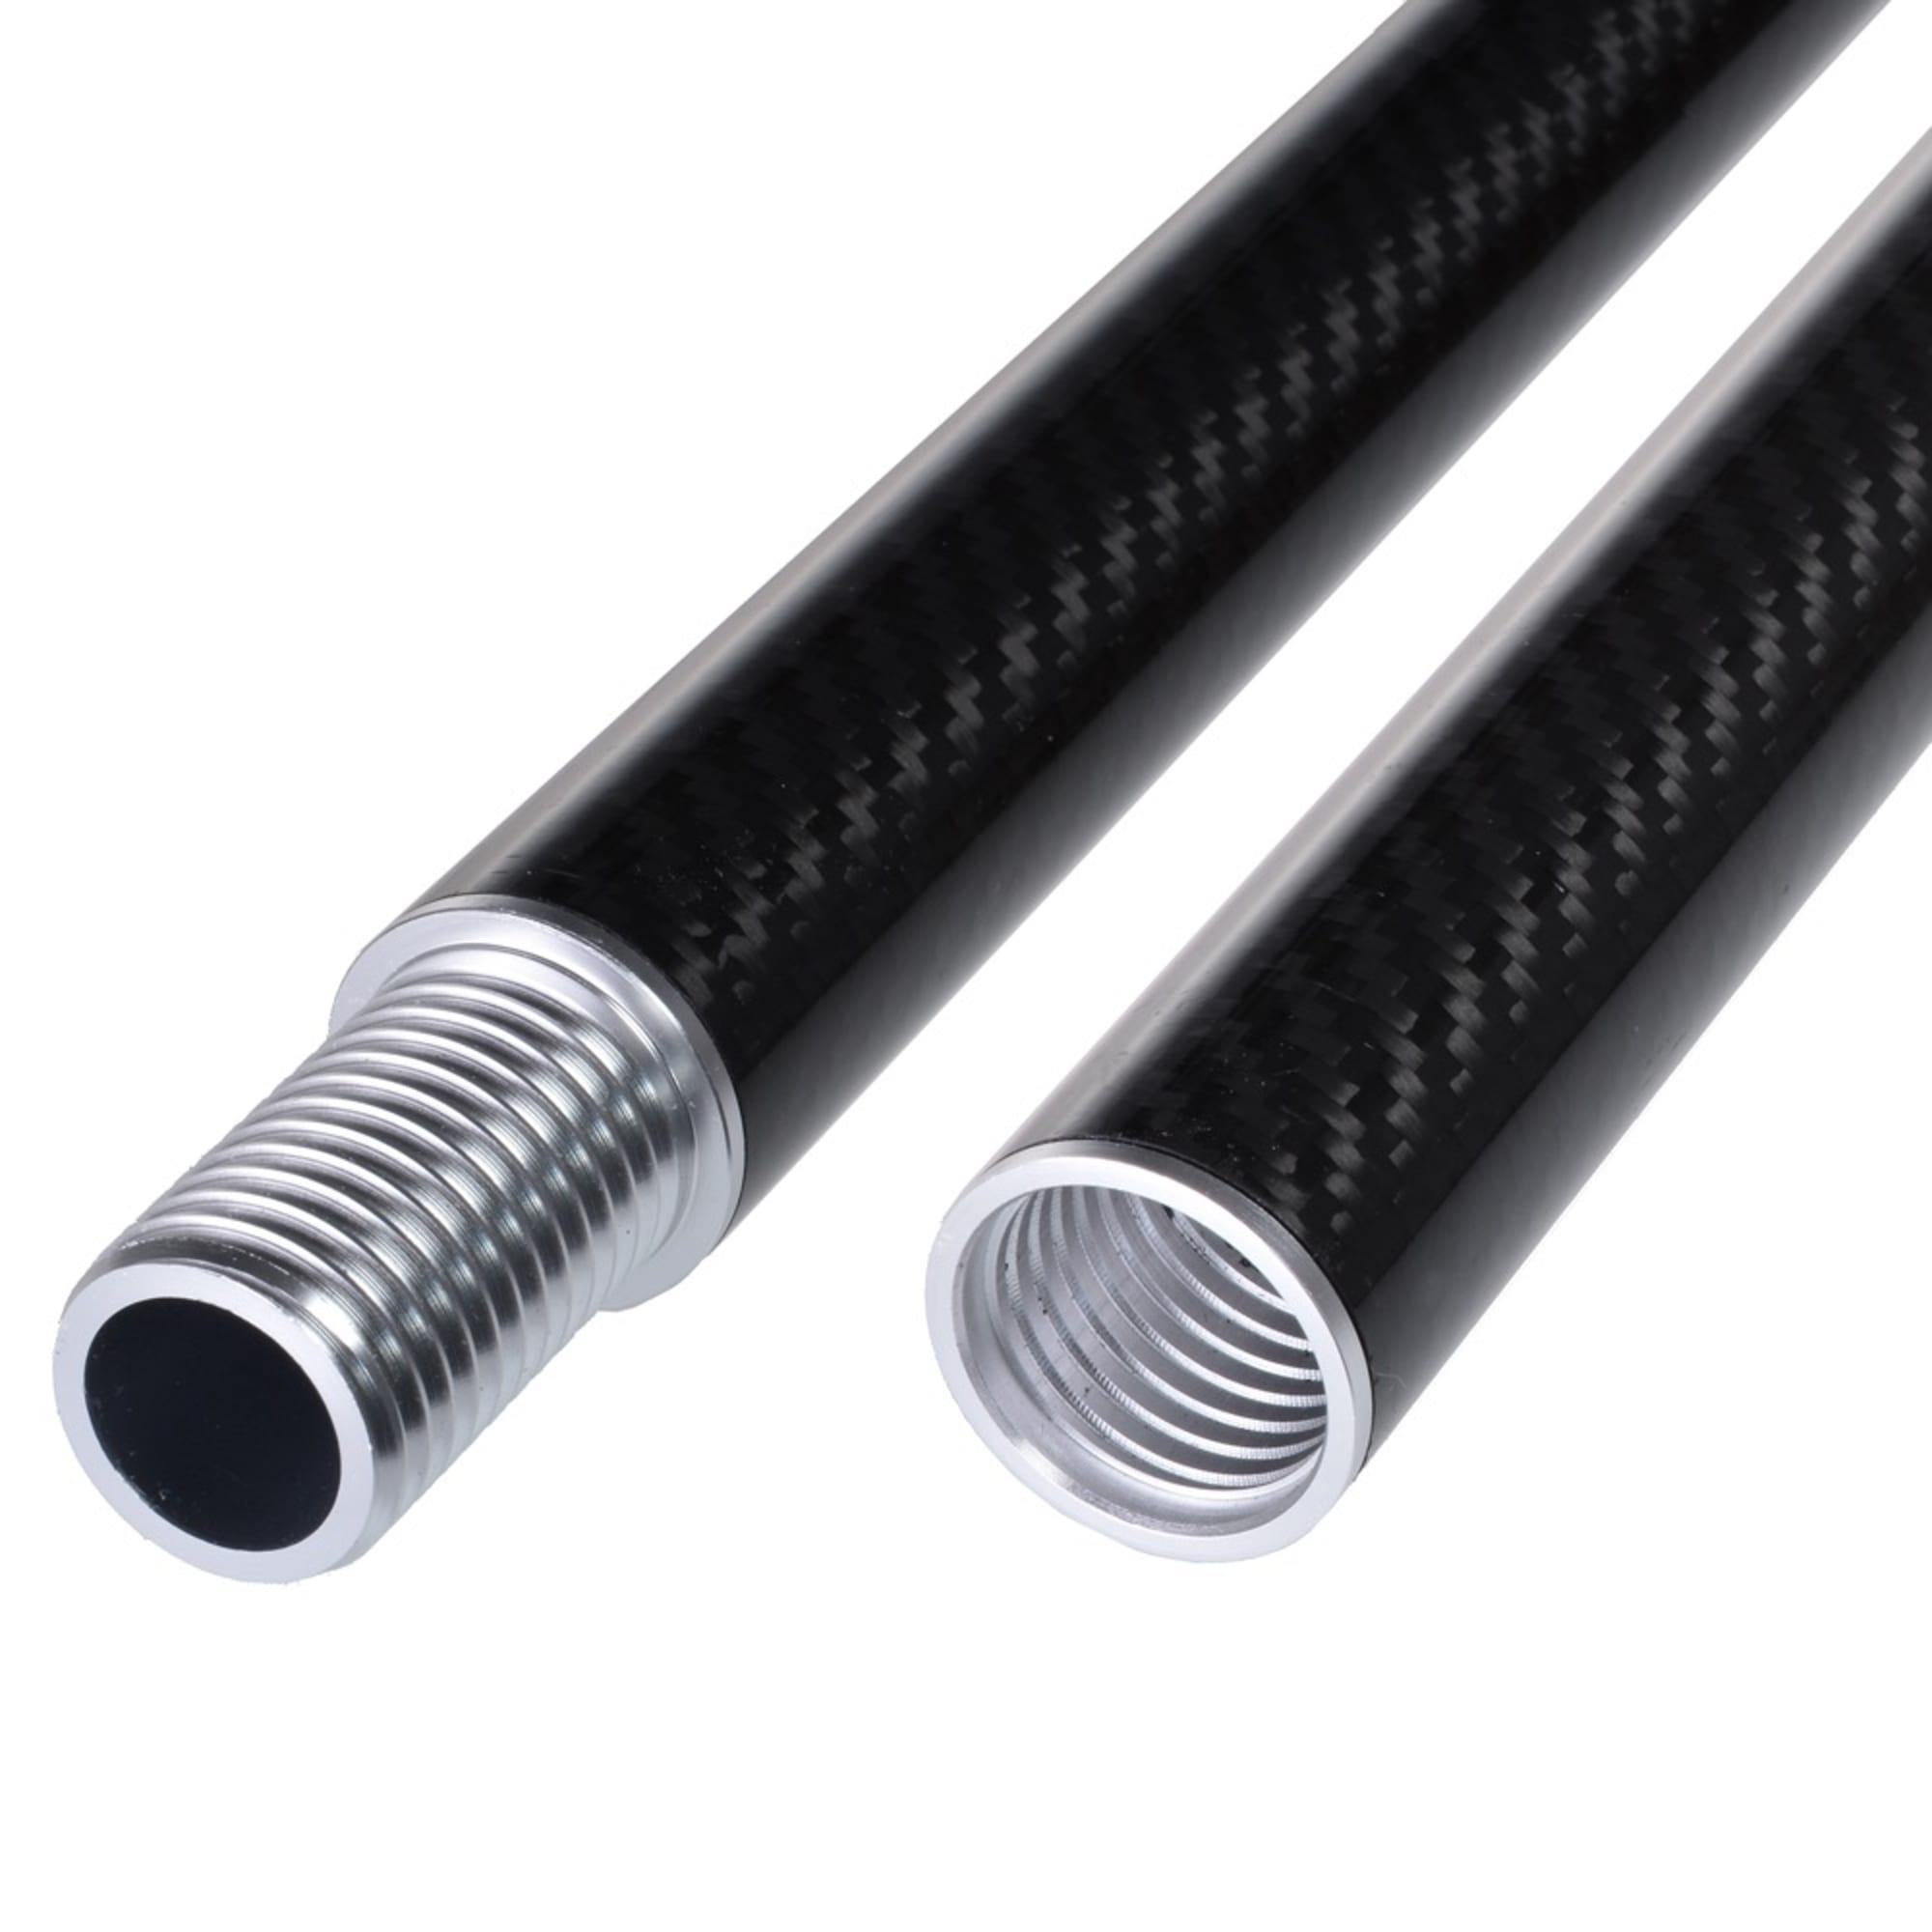 CARBON round tube wound, 3k-TW (Ø 32 x 28) with threaded inserts